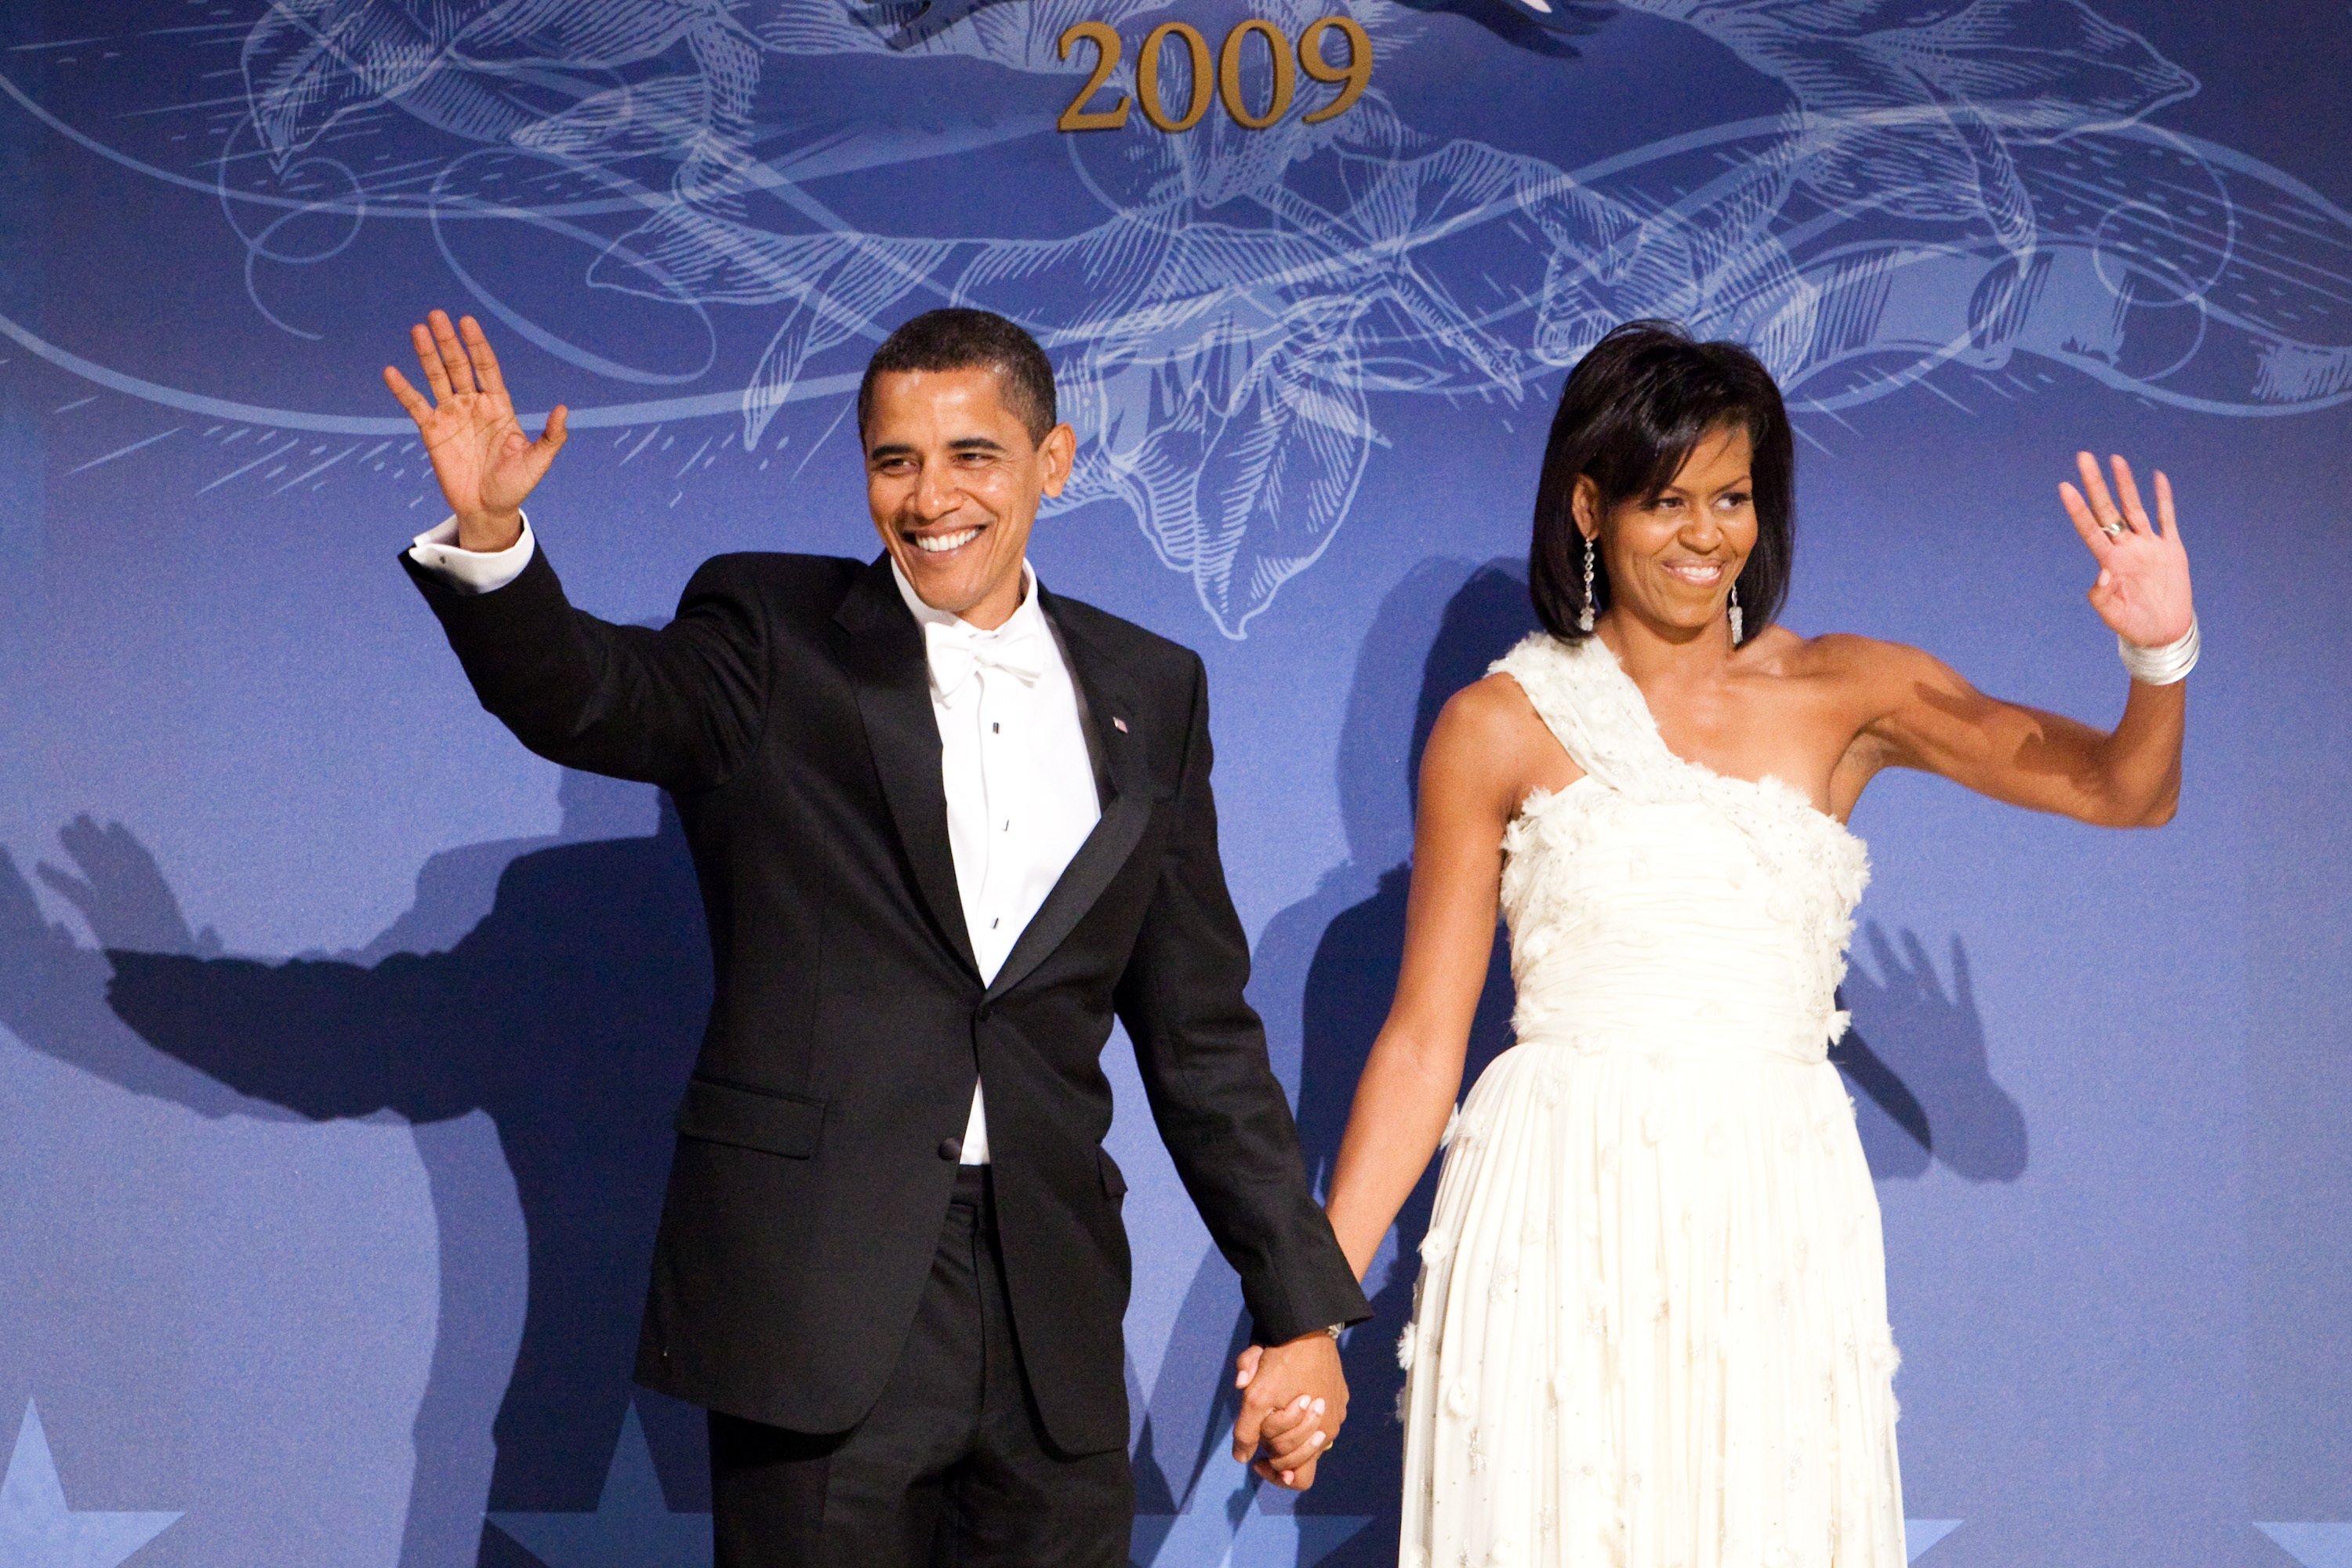 Barack Obama and Michelle Obama at the Southern Inaugural Ball on January 21, 2009, Washington, DC | Source: Getty Images